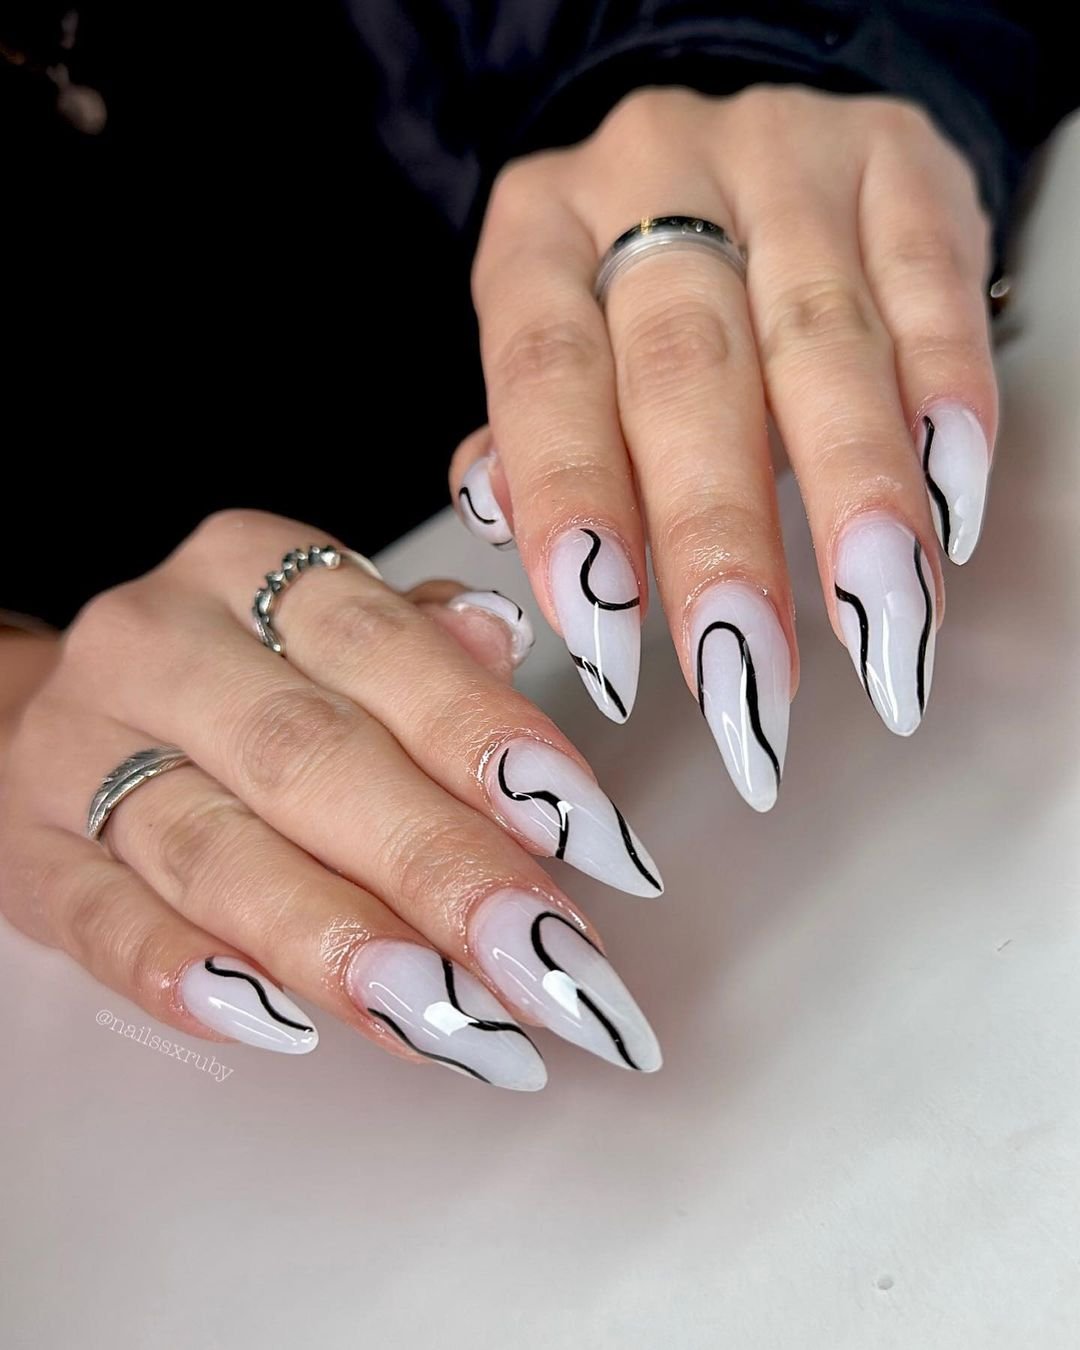 3 - Picture of Black and White Nails